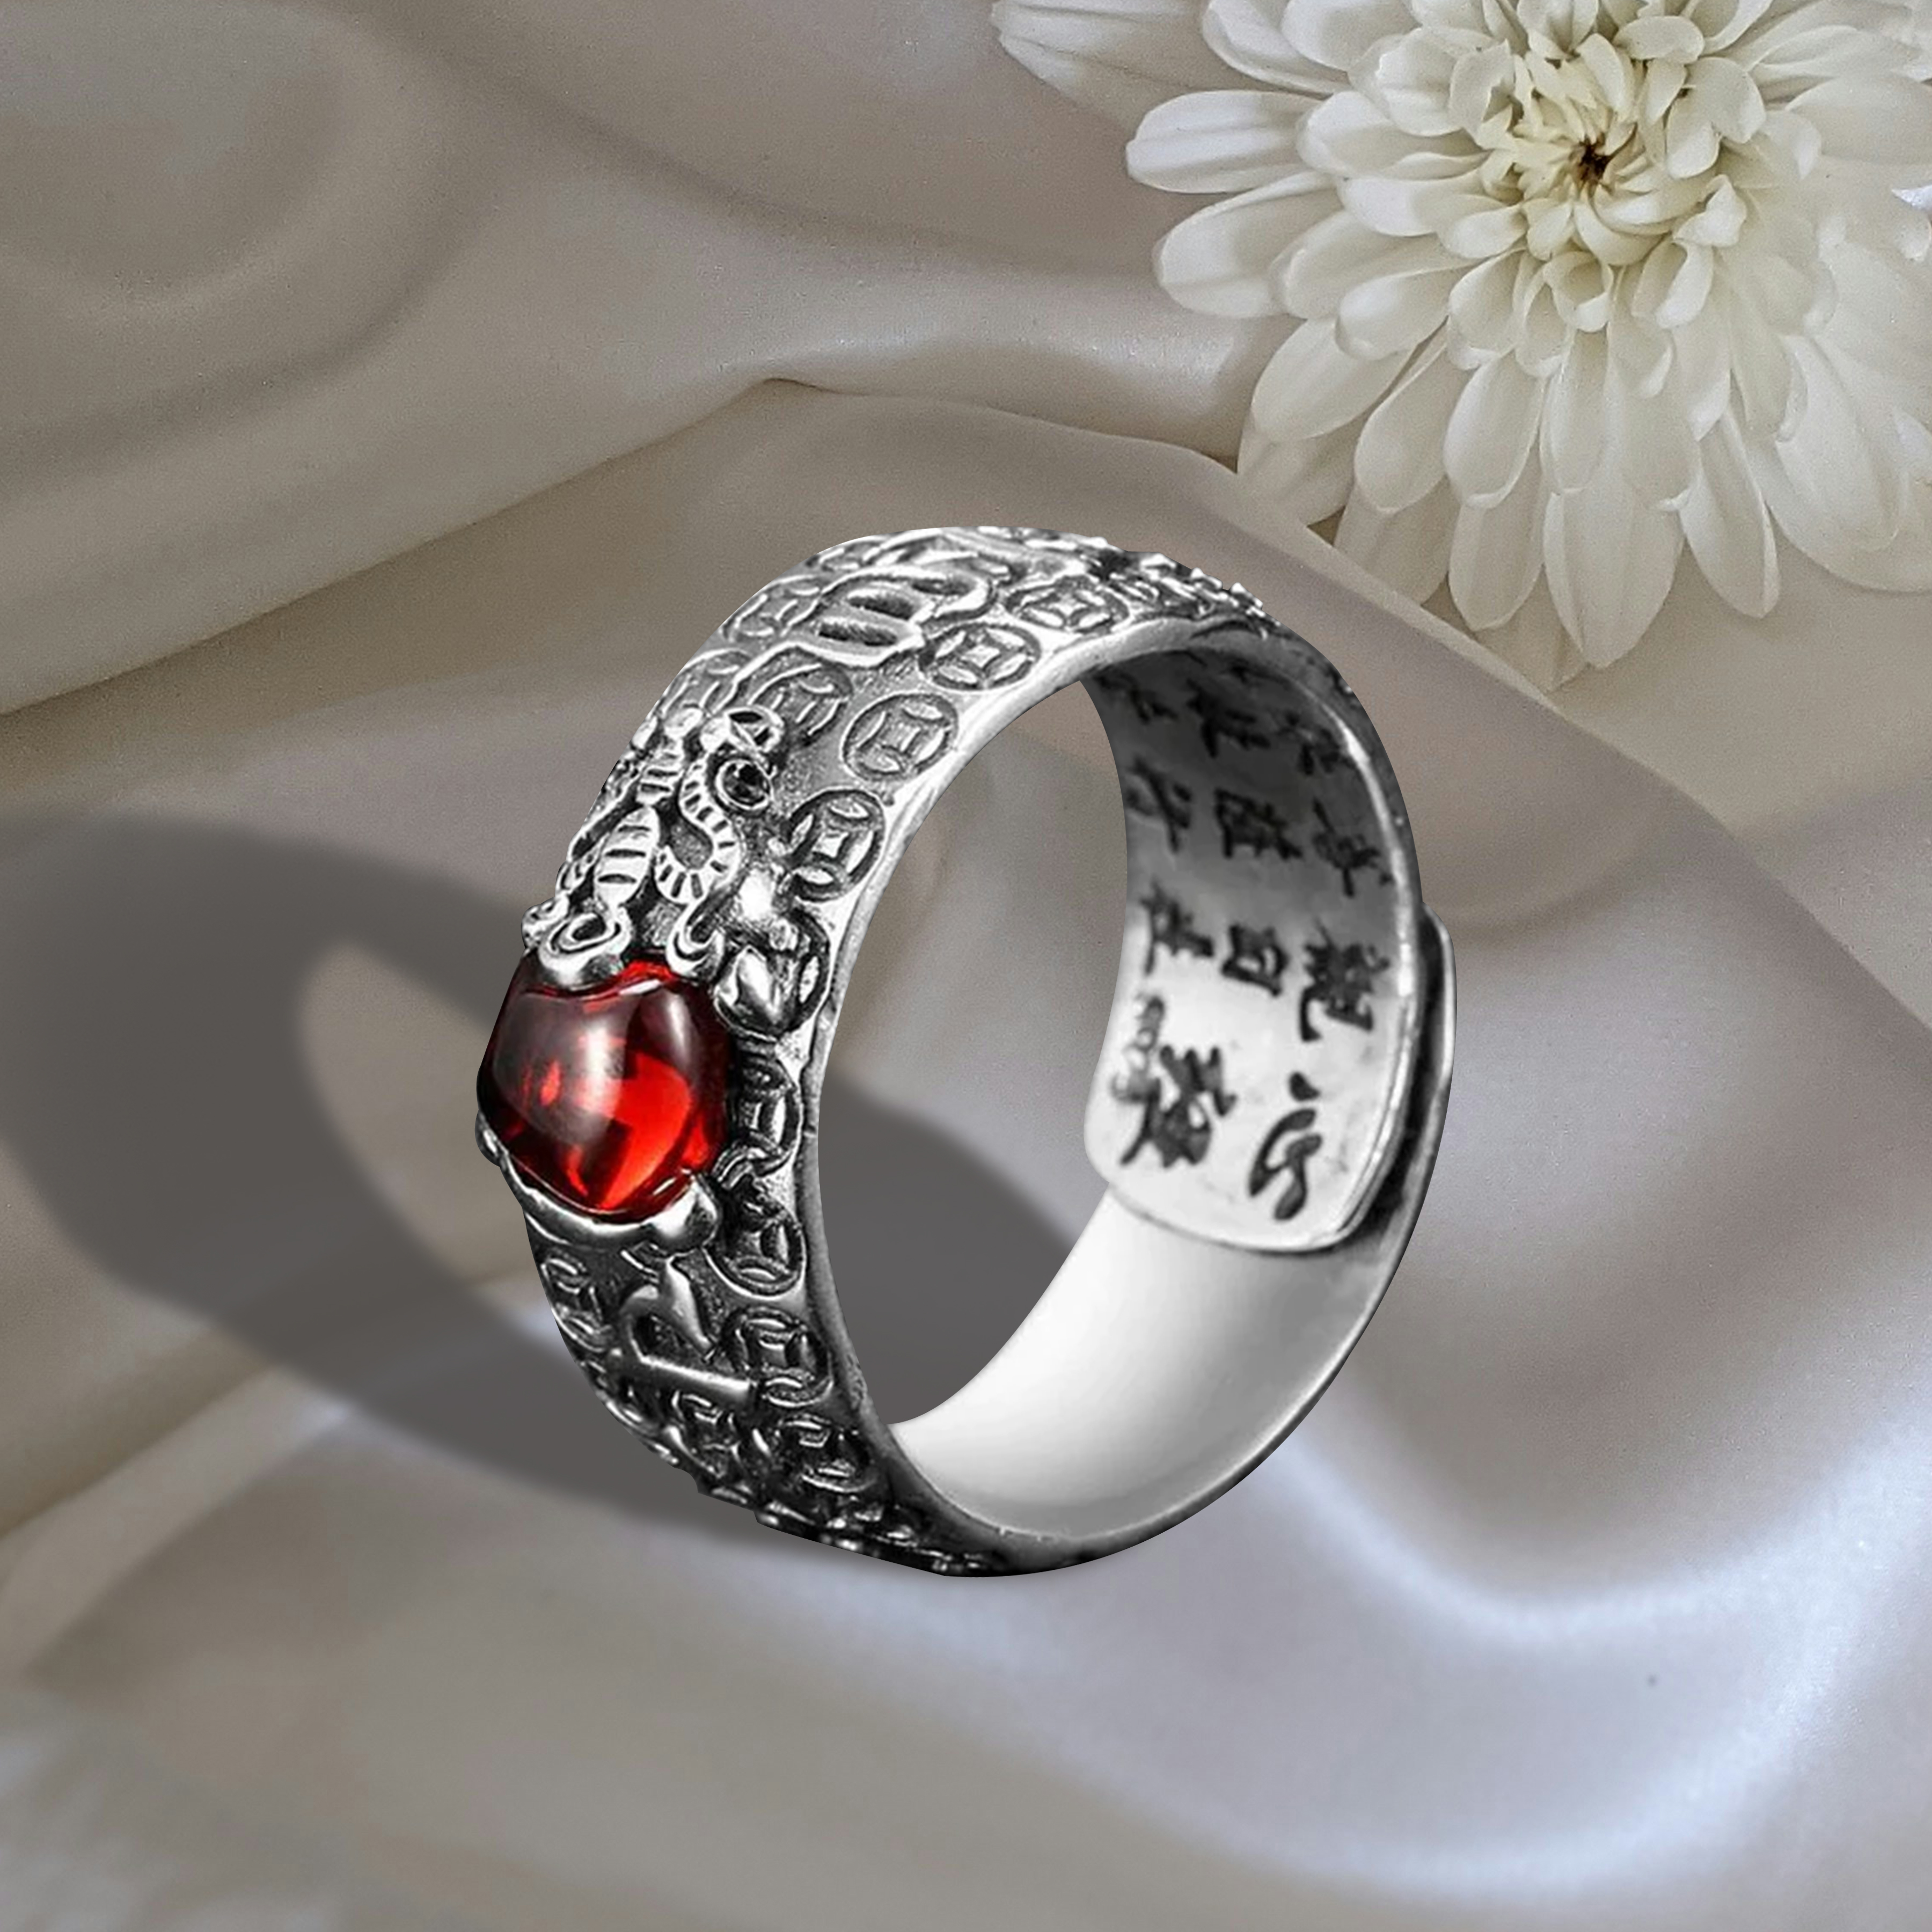 Lucklumen Natural Garnet Pixiu  Feng Shui Wealth Ring Attracts Wealth and Success 